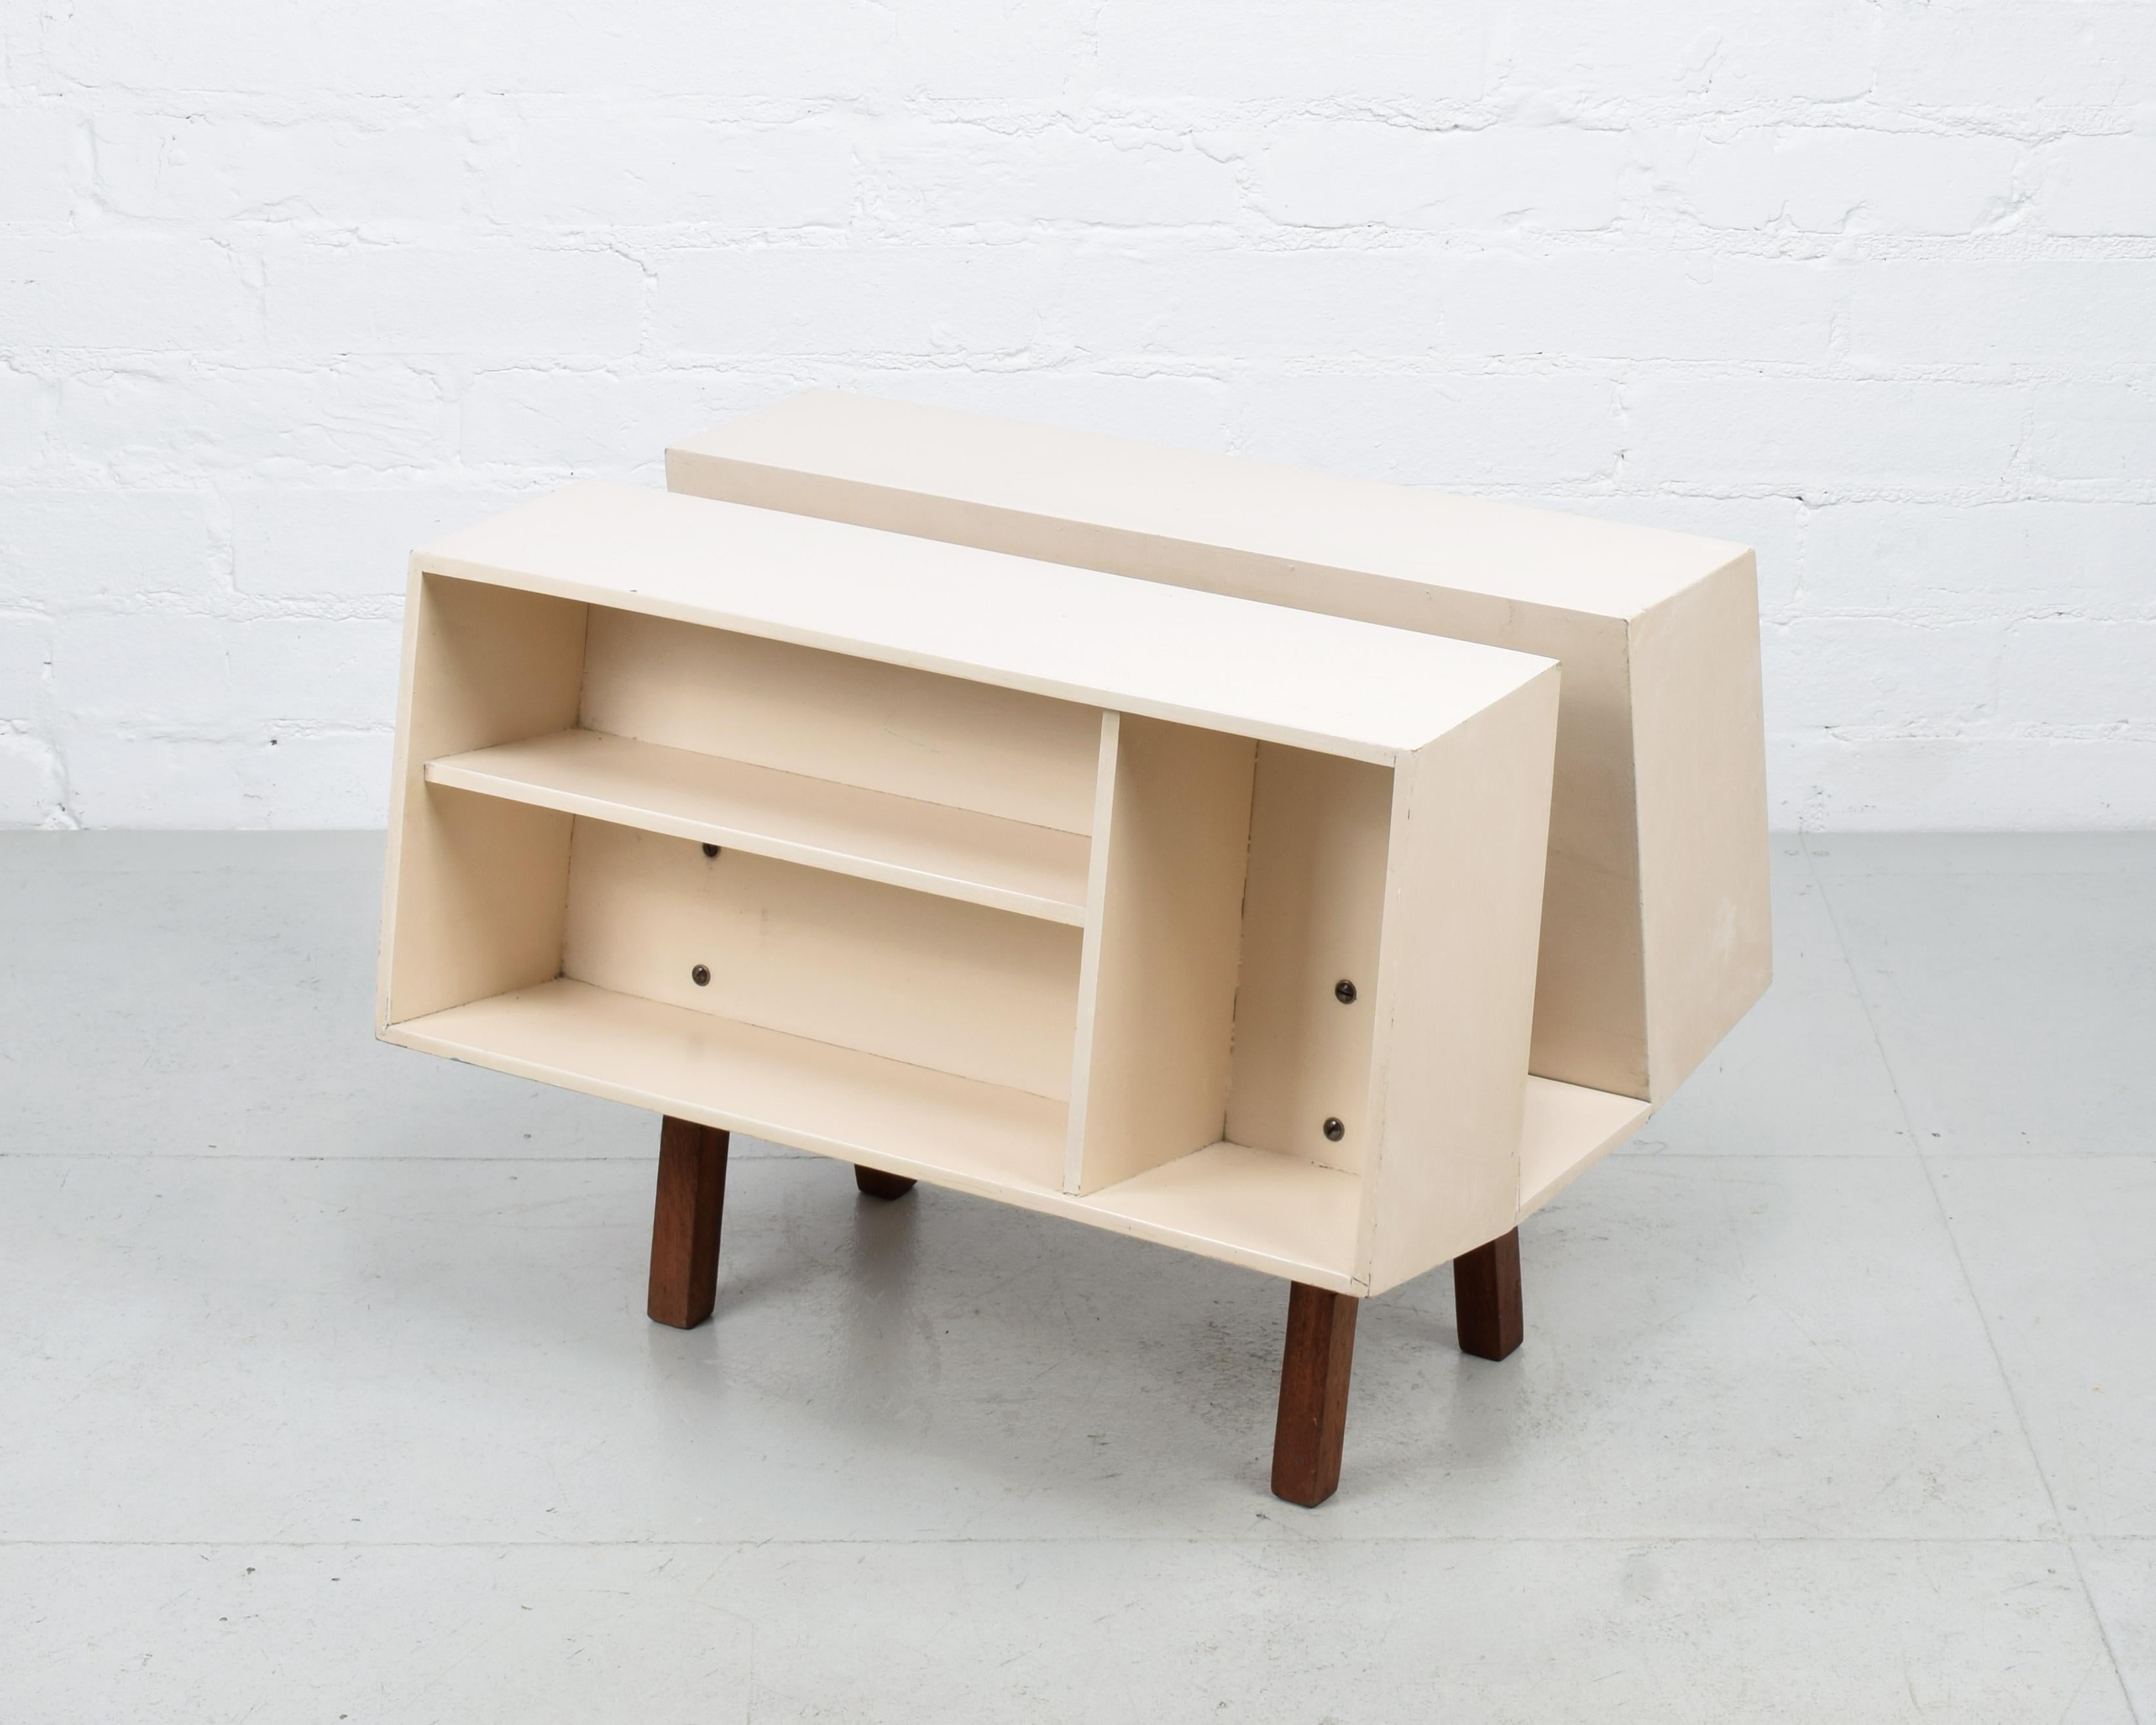 Ernest Race, UK.

Isokon Donkey Mark 2

Designed 1963 for the Isokon Furniture Company.

Cream-white painted plywood with wooden legs.

L 53 cm, W 41 cm, H 40 cm; Wt 5.2 kg

Originally supplied flat-packed, the donkey was sold as a mail order item.